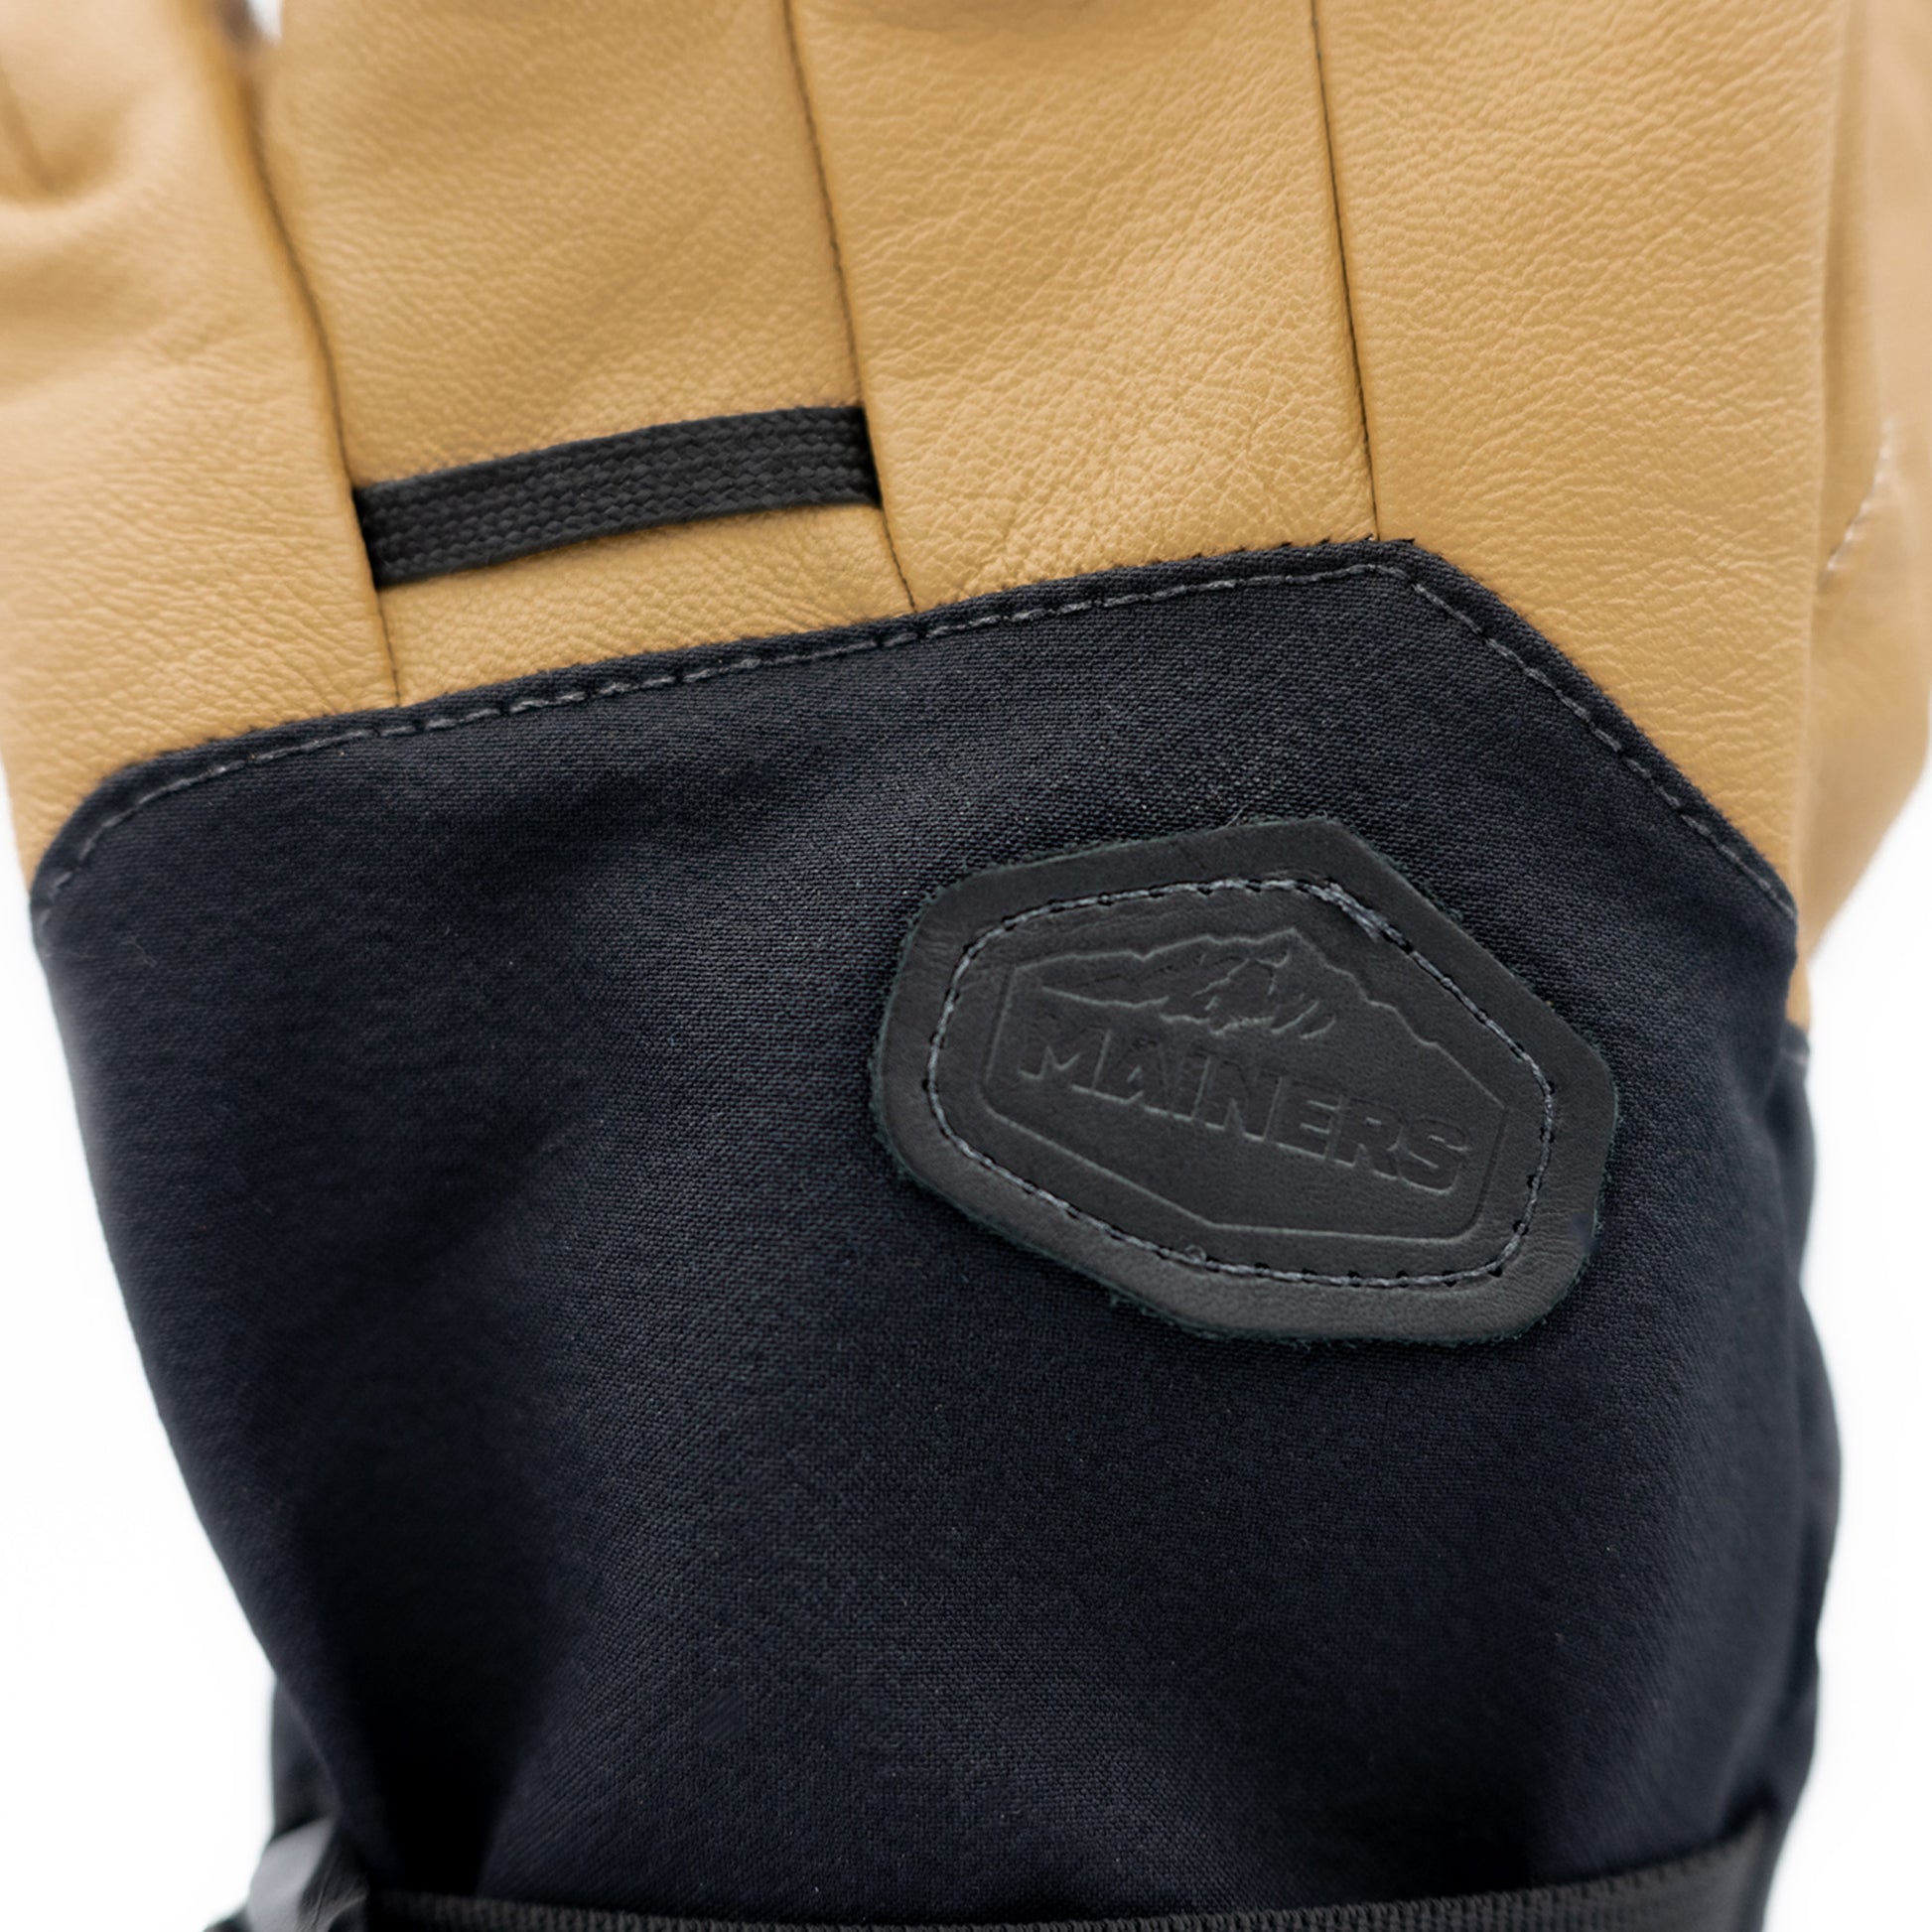 A pair of black and tan Mainers ski gloves.